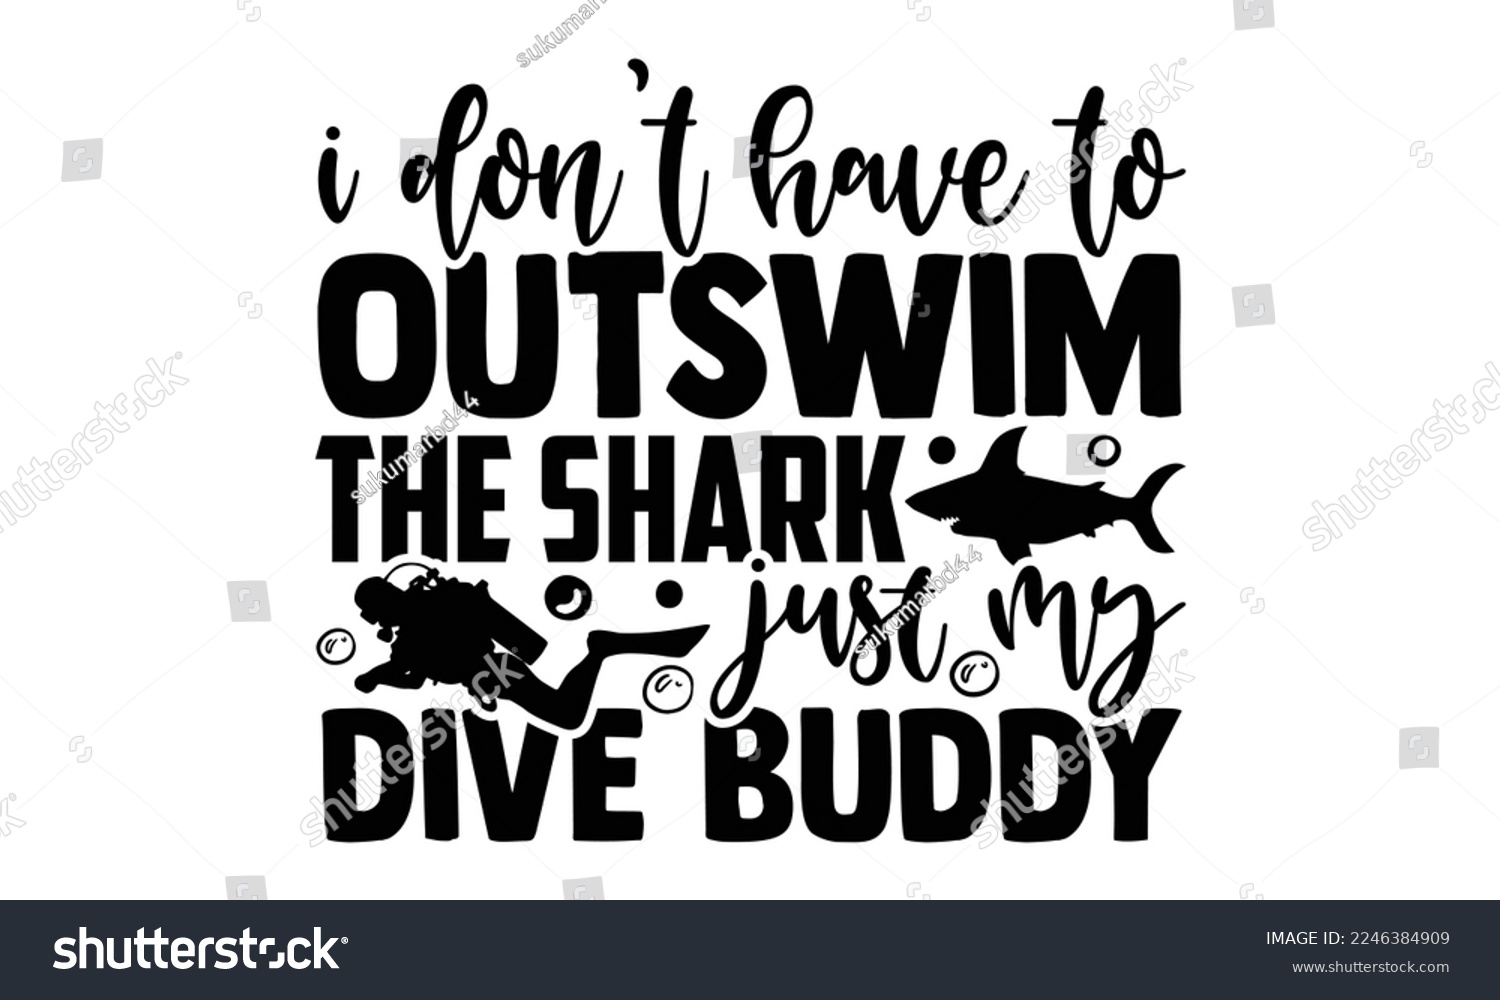 SVG of I Don’t Have To Outswim The Shark Just My Dive Buddy  - Scuba Diving T-shirt Design, Calligraphy graphic design, Hand drawn lettering phrase isolated on white background, eps, svg Files for Cutting svg